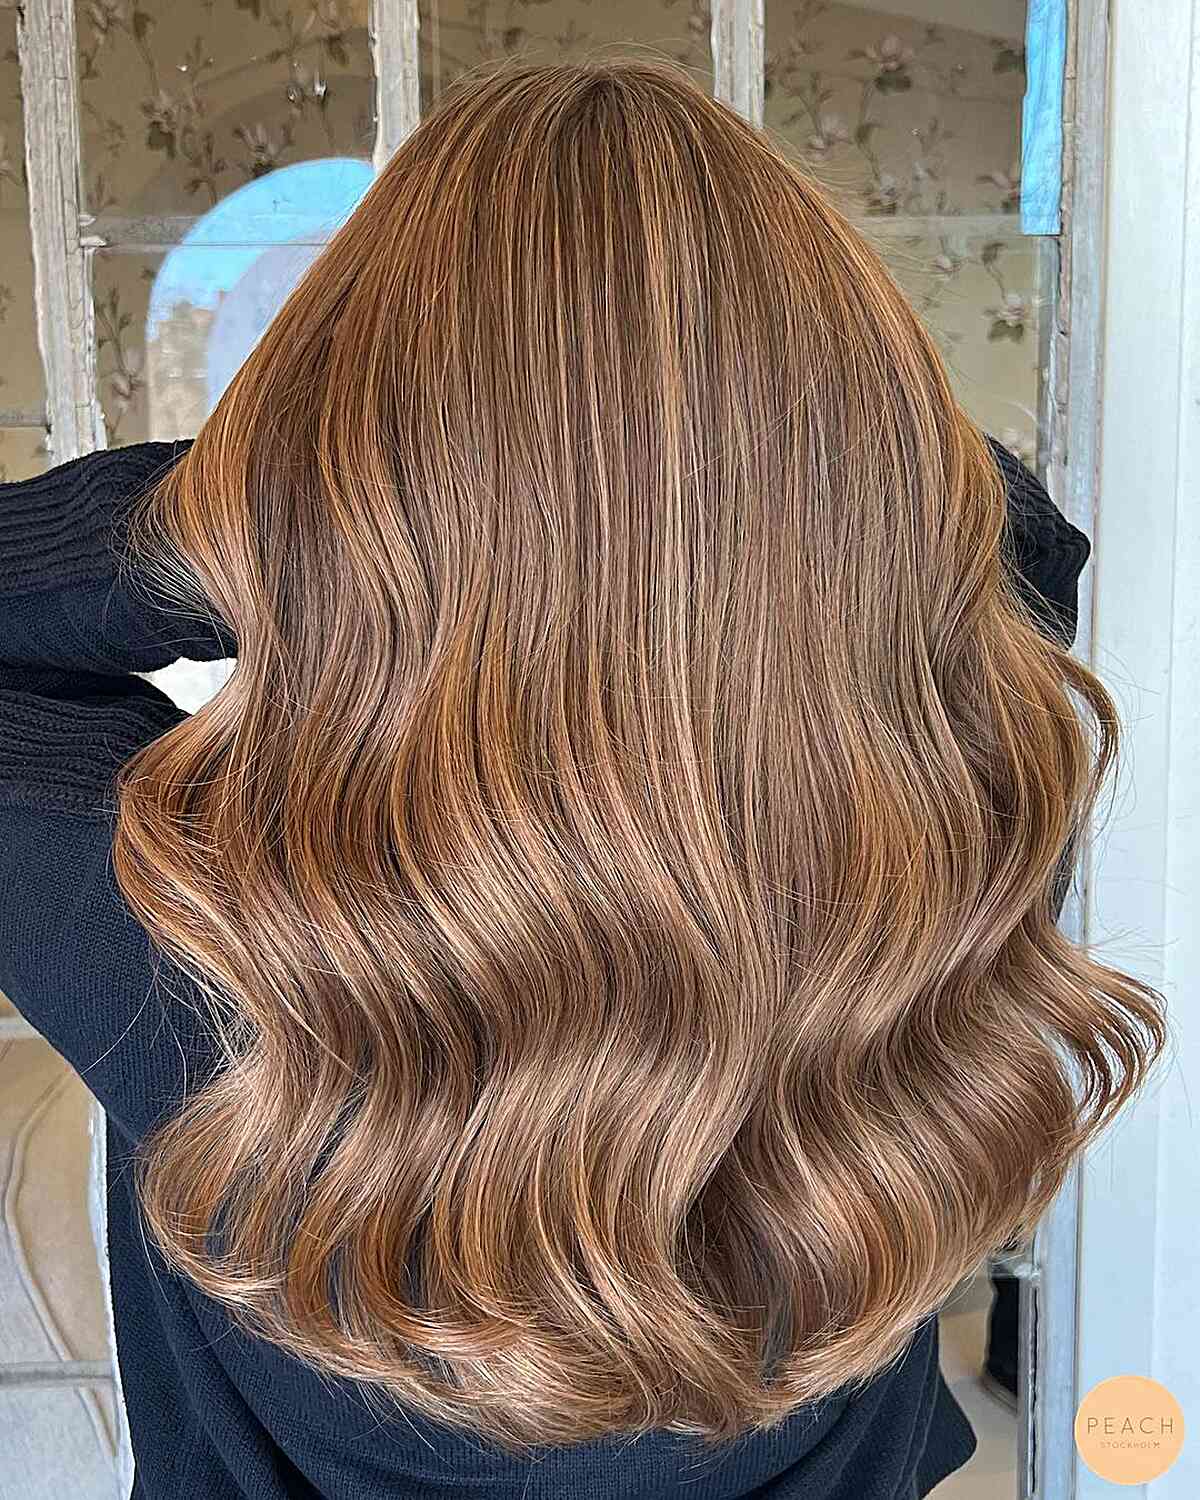 Glossy Light Brown - Caramel Blonde Hair Color with Long Waves